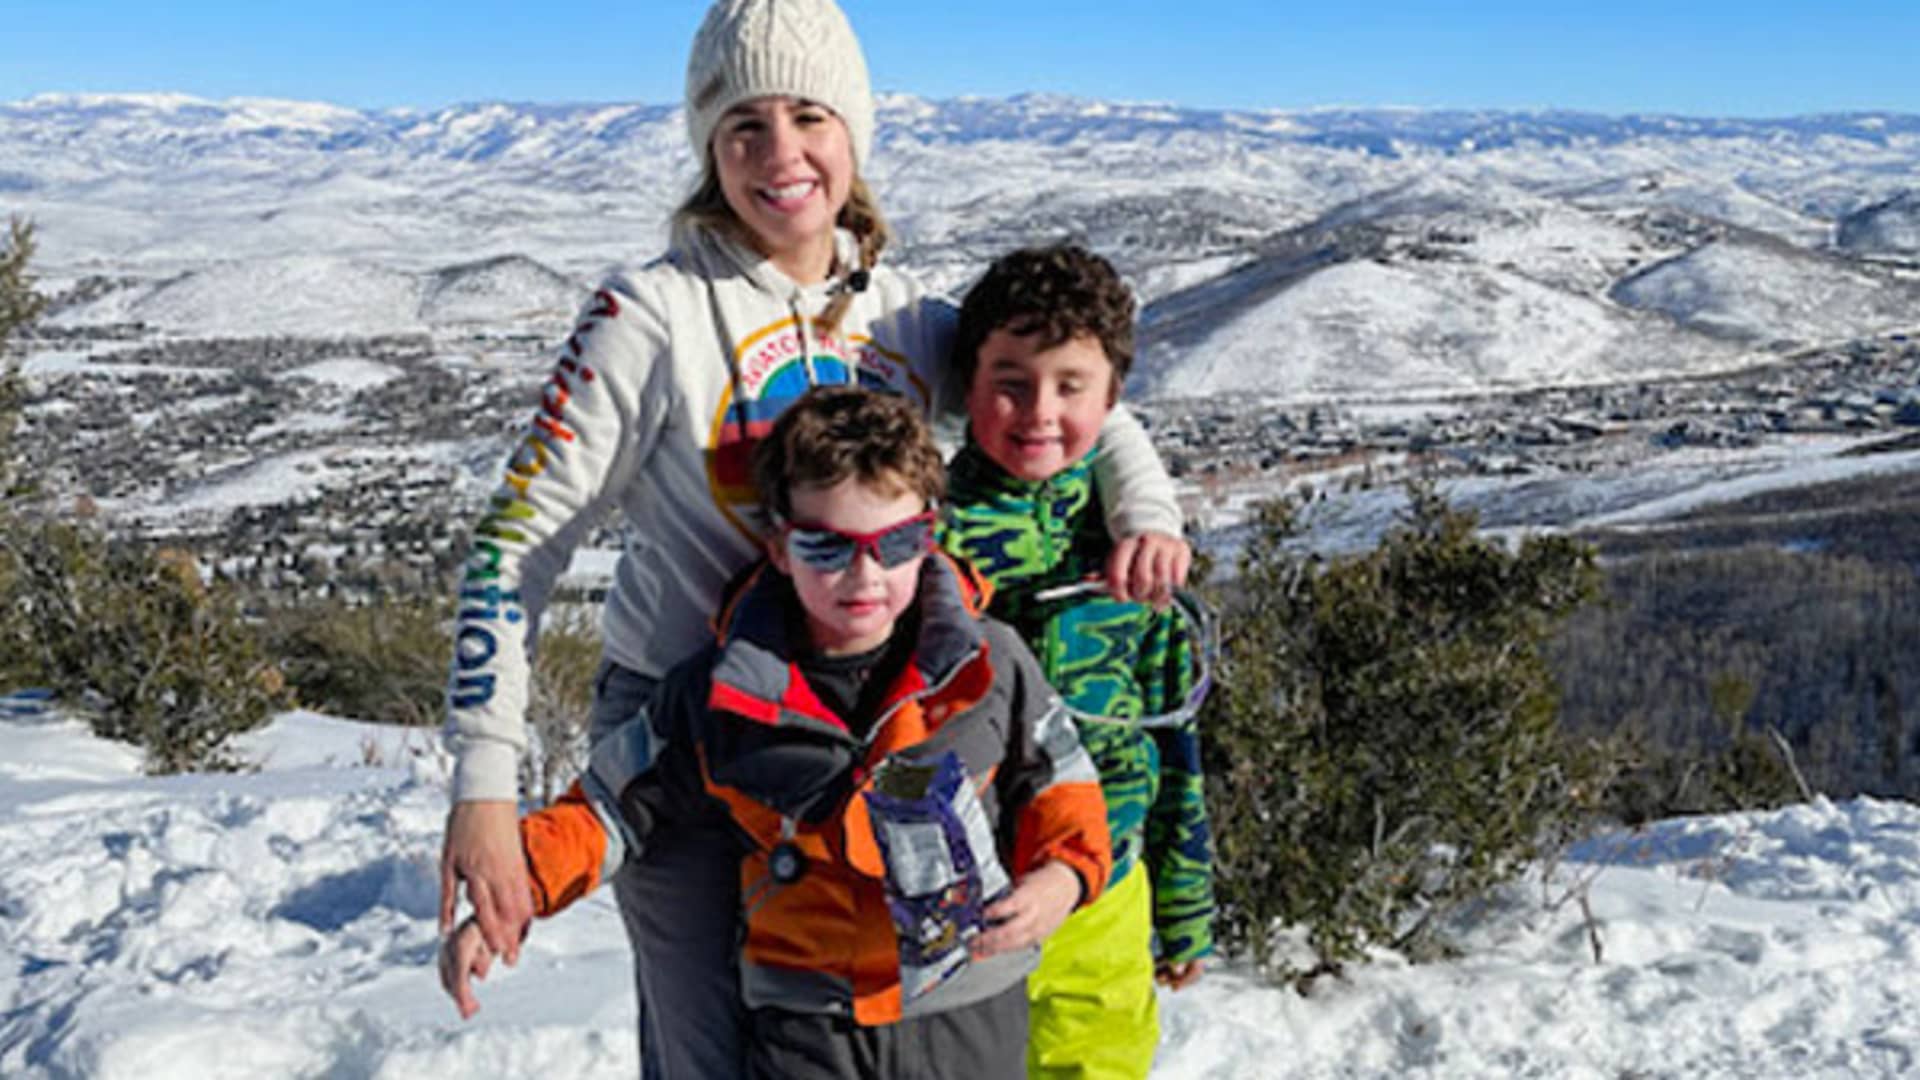 Jennifer Sutton, pictured with her children, quit her job last year to open Guest Haus Juicery & Matcha Bar in Park City, Utah.